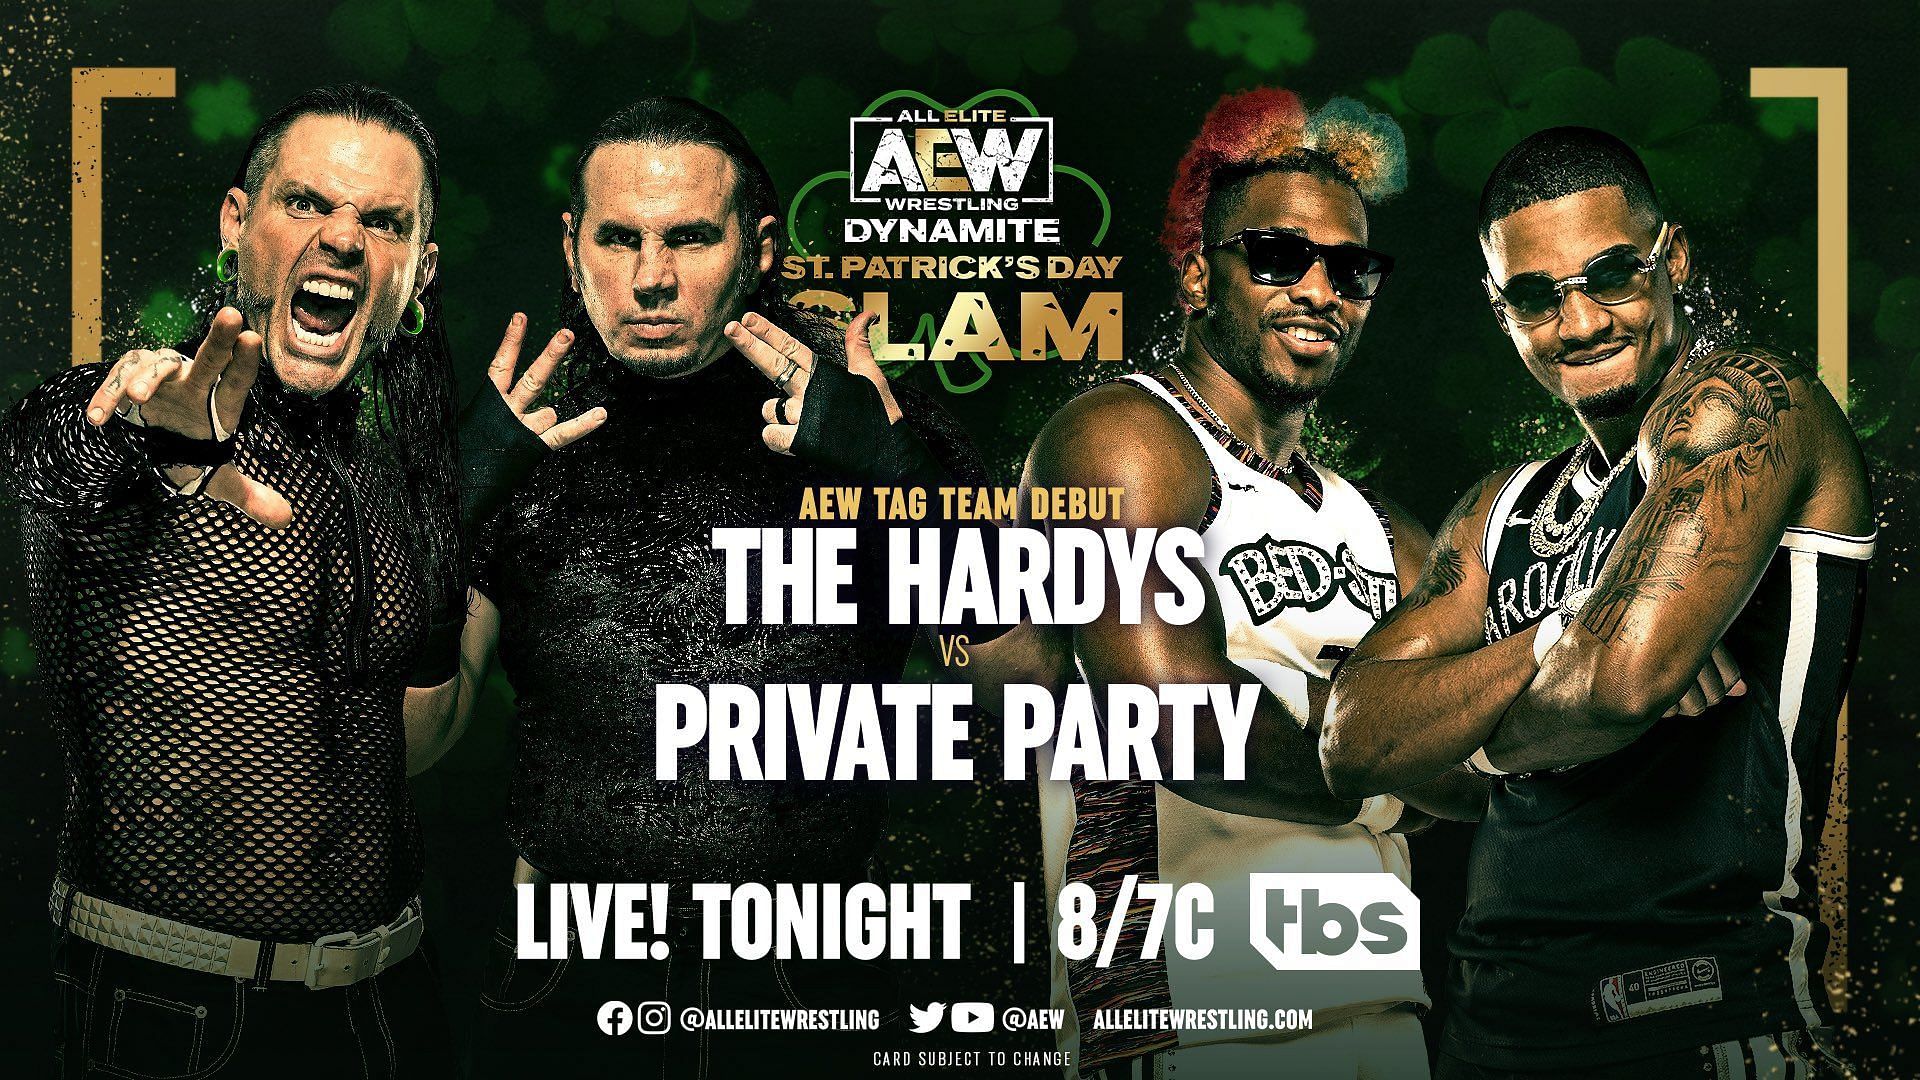 The Hardy Boyz teamed up for the first time on AEW Dynamite